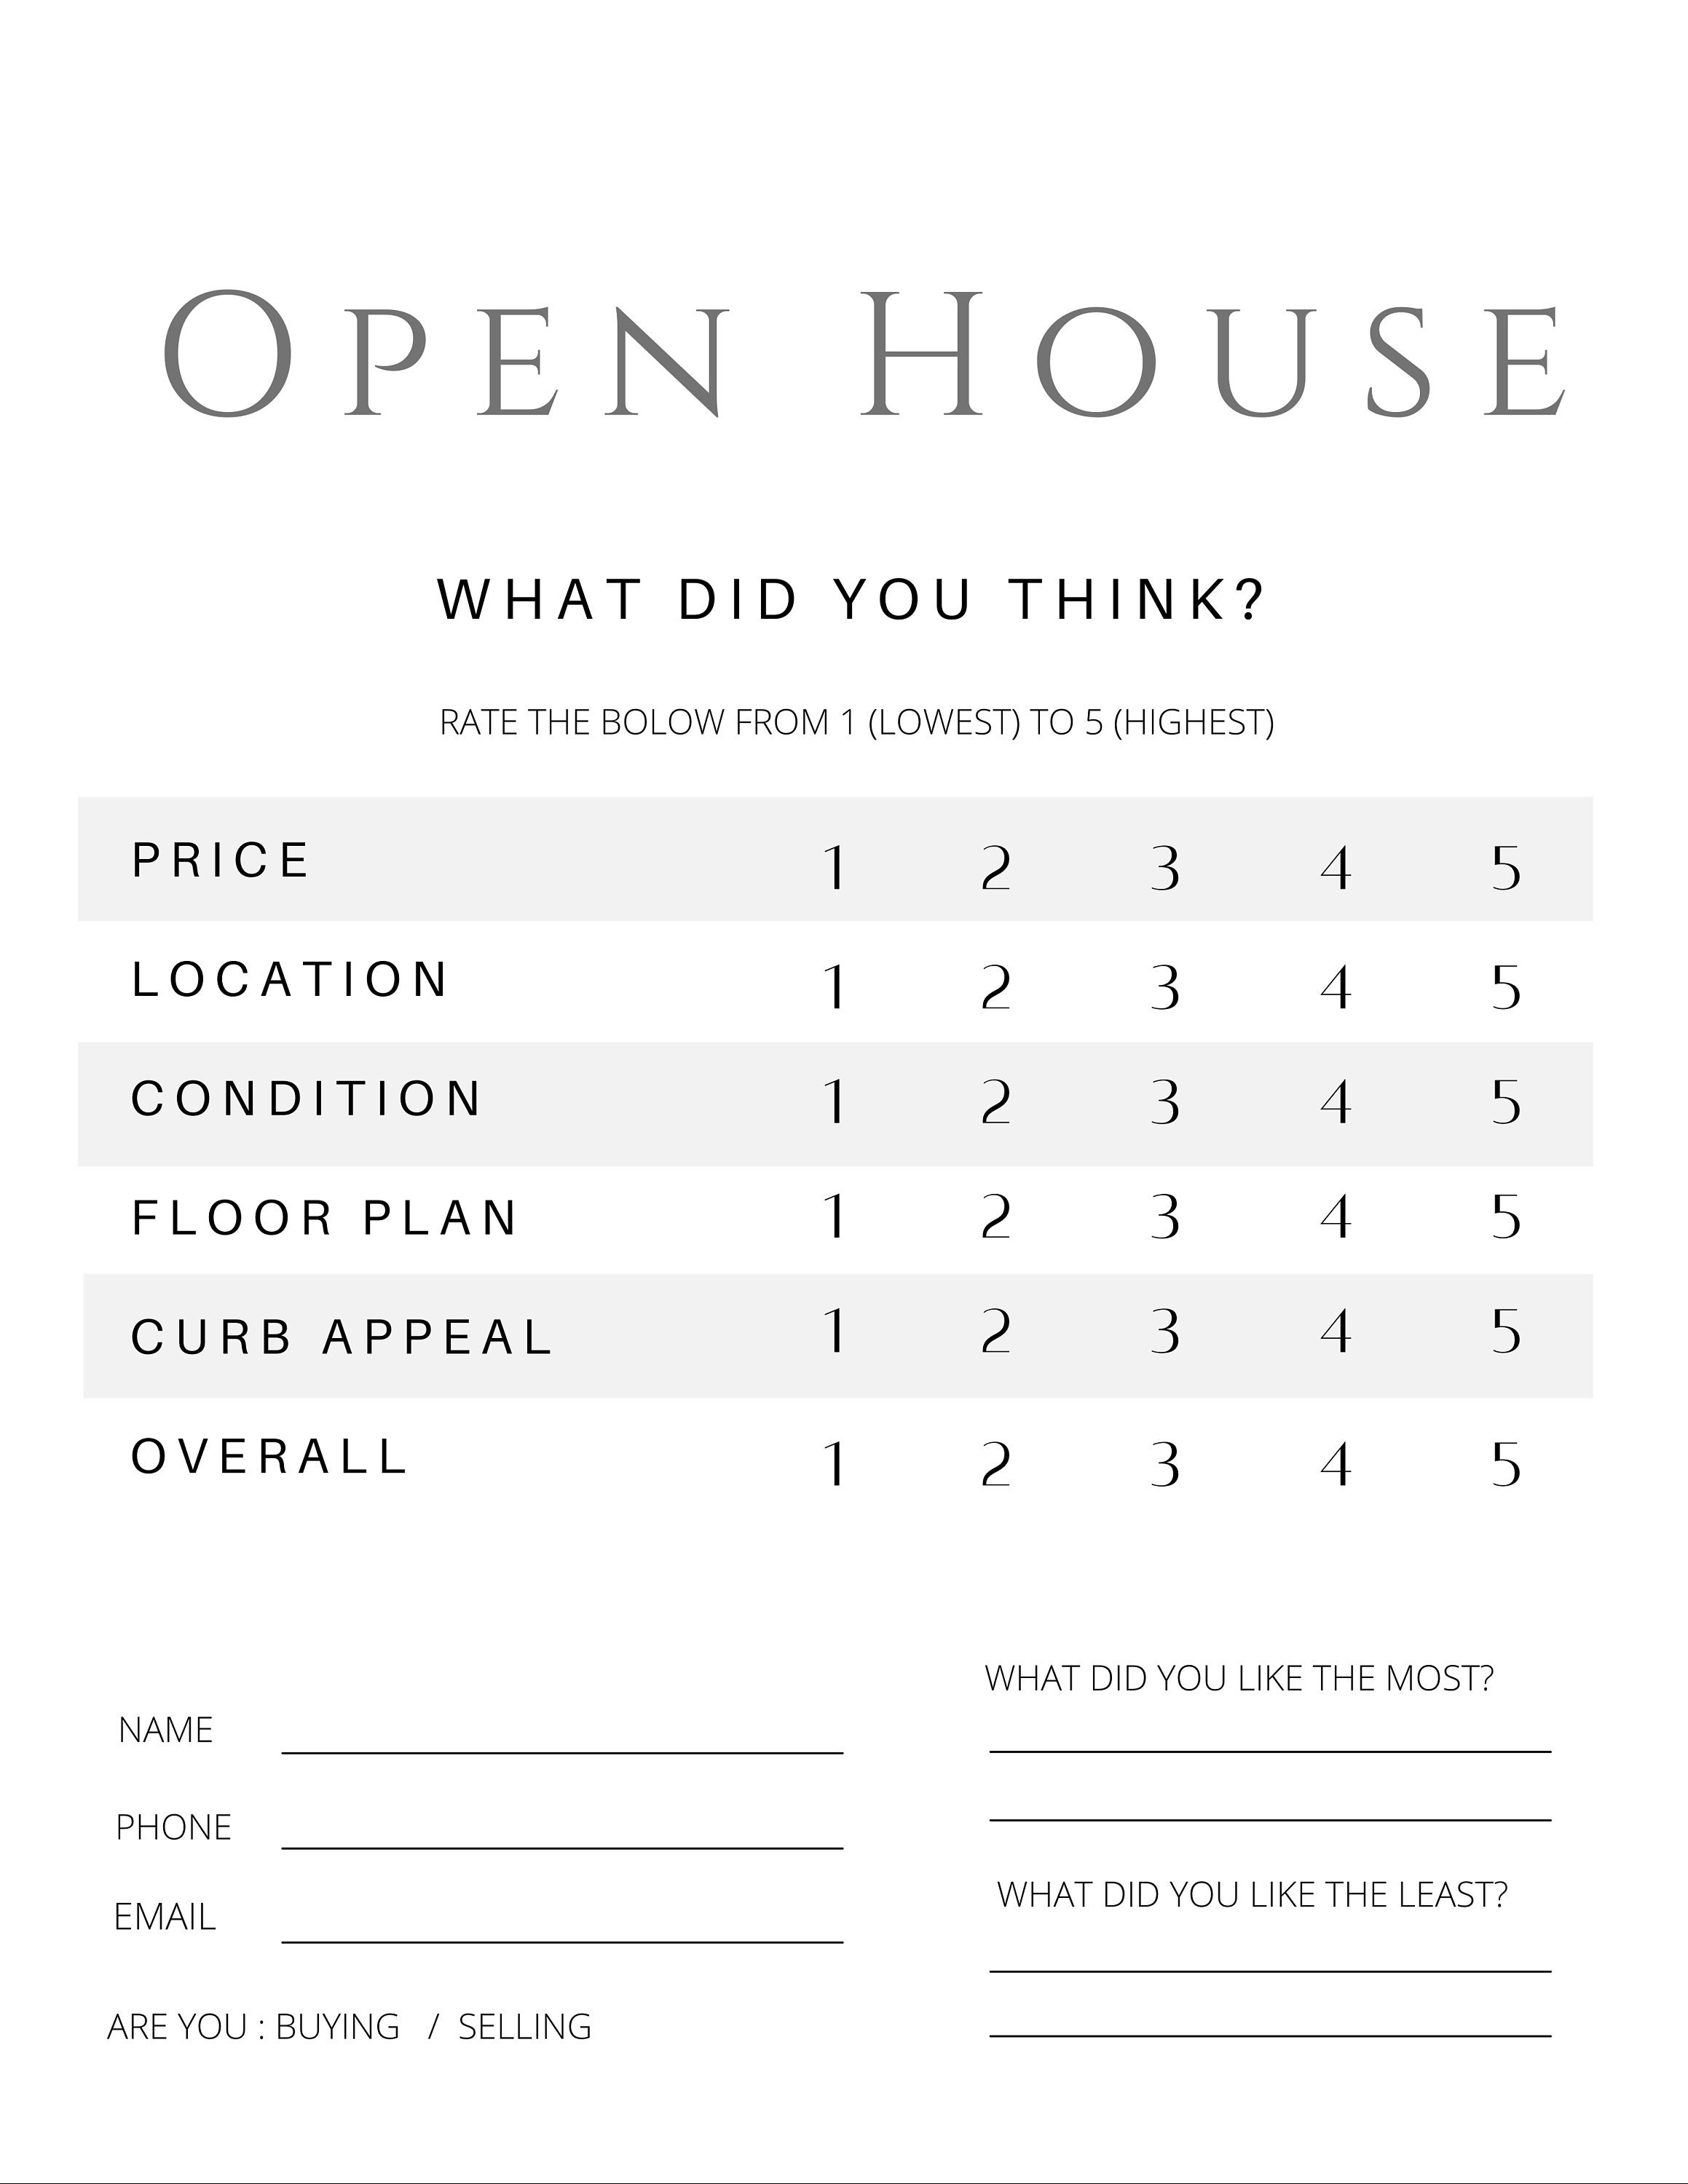 open-house-feedback-form-sheet-template-real-estate-etsy